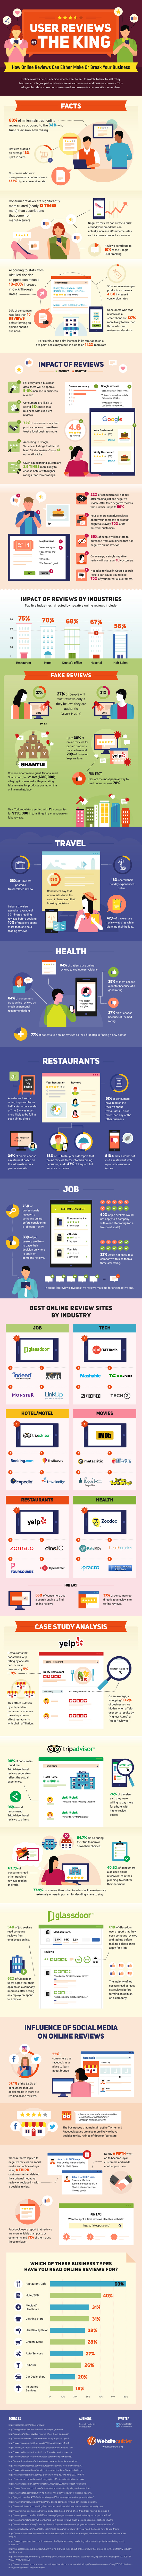 Power Of Online Reviews Infographic